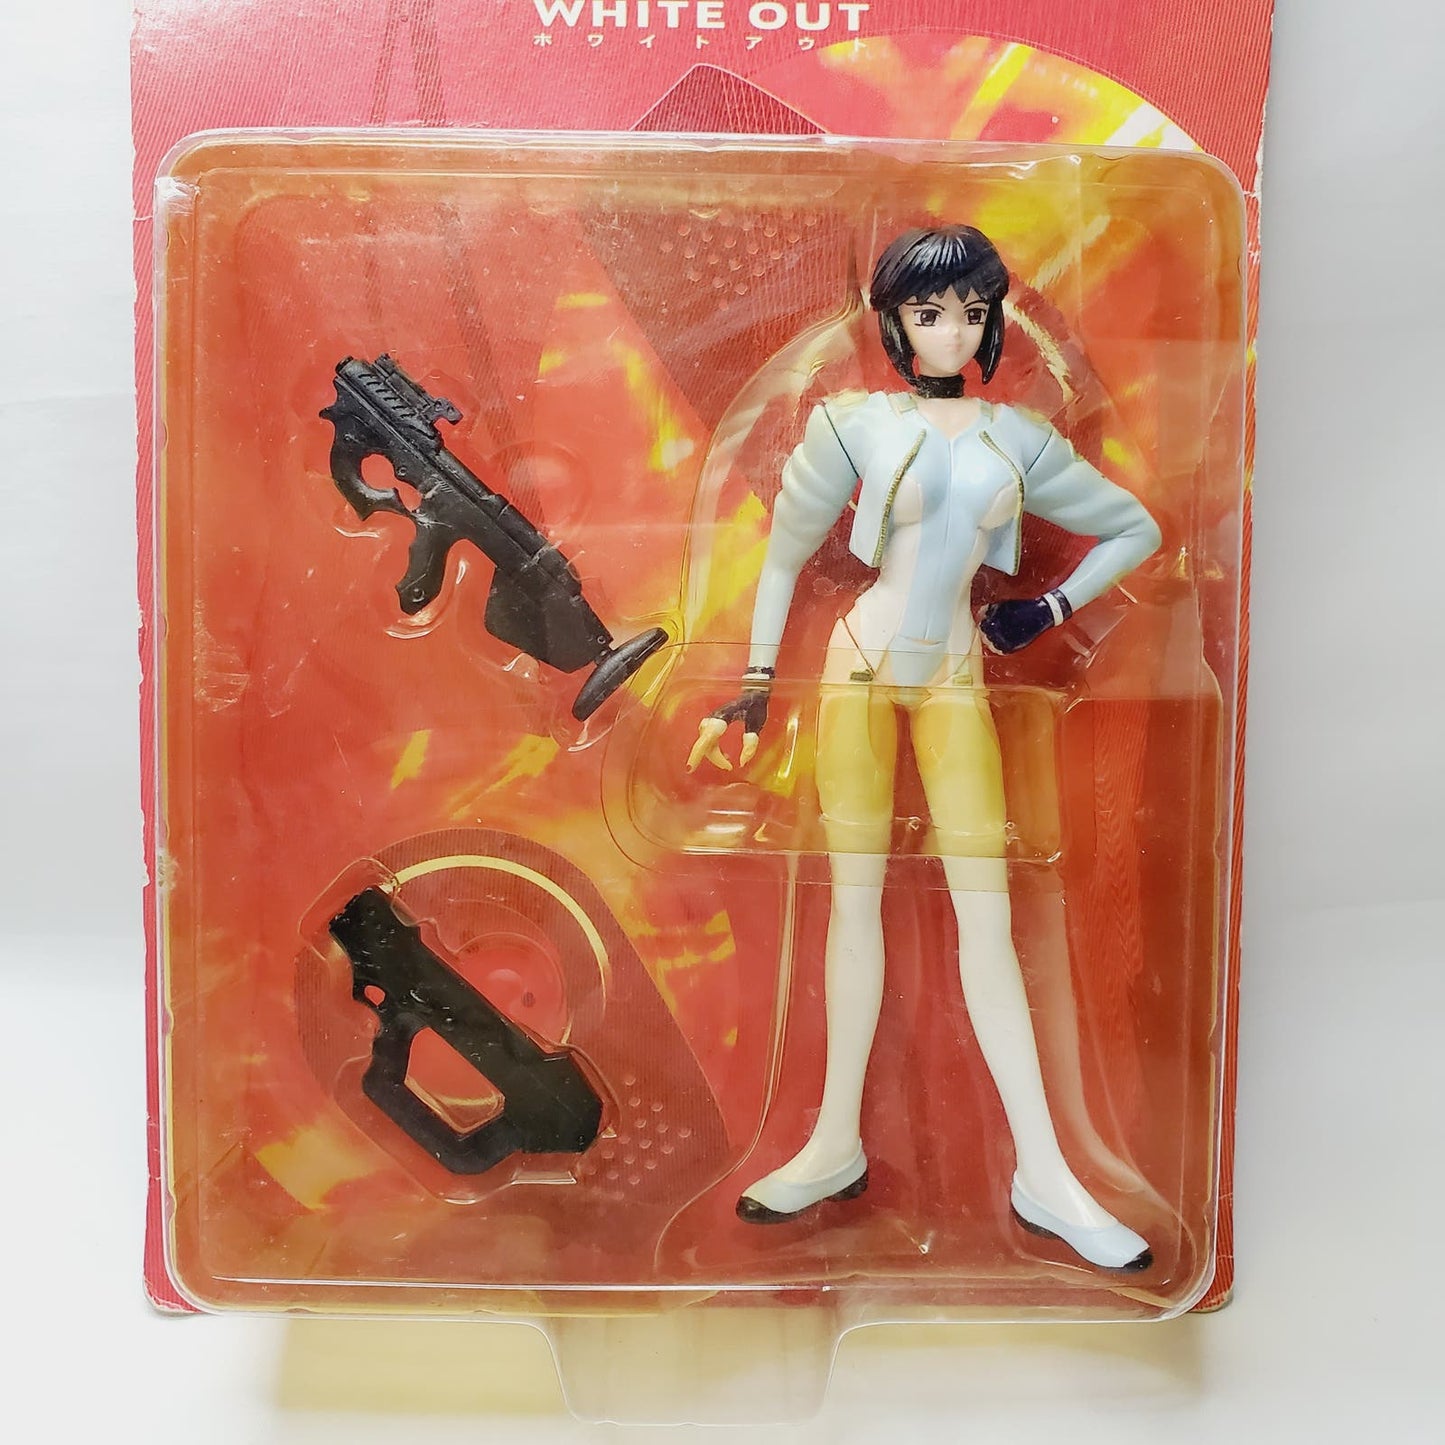 '99 Vintage Ghost in the Shell Motoko Kusanagi White Out Action Figure - NIB